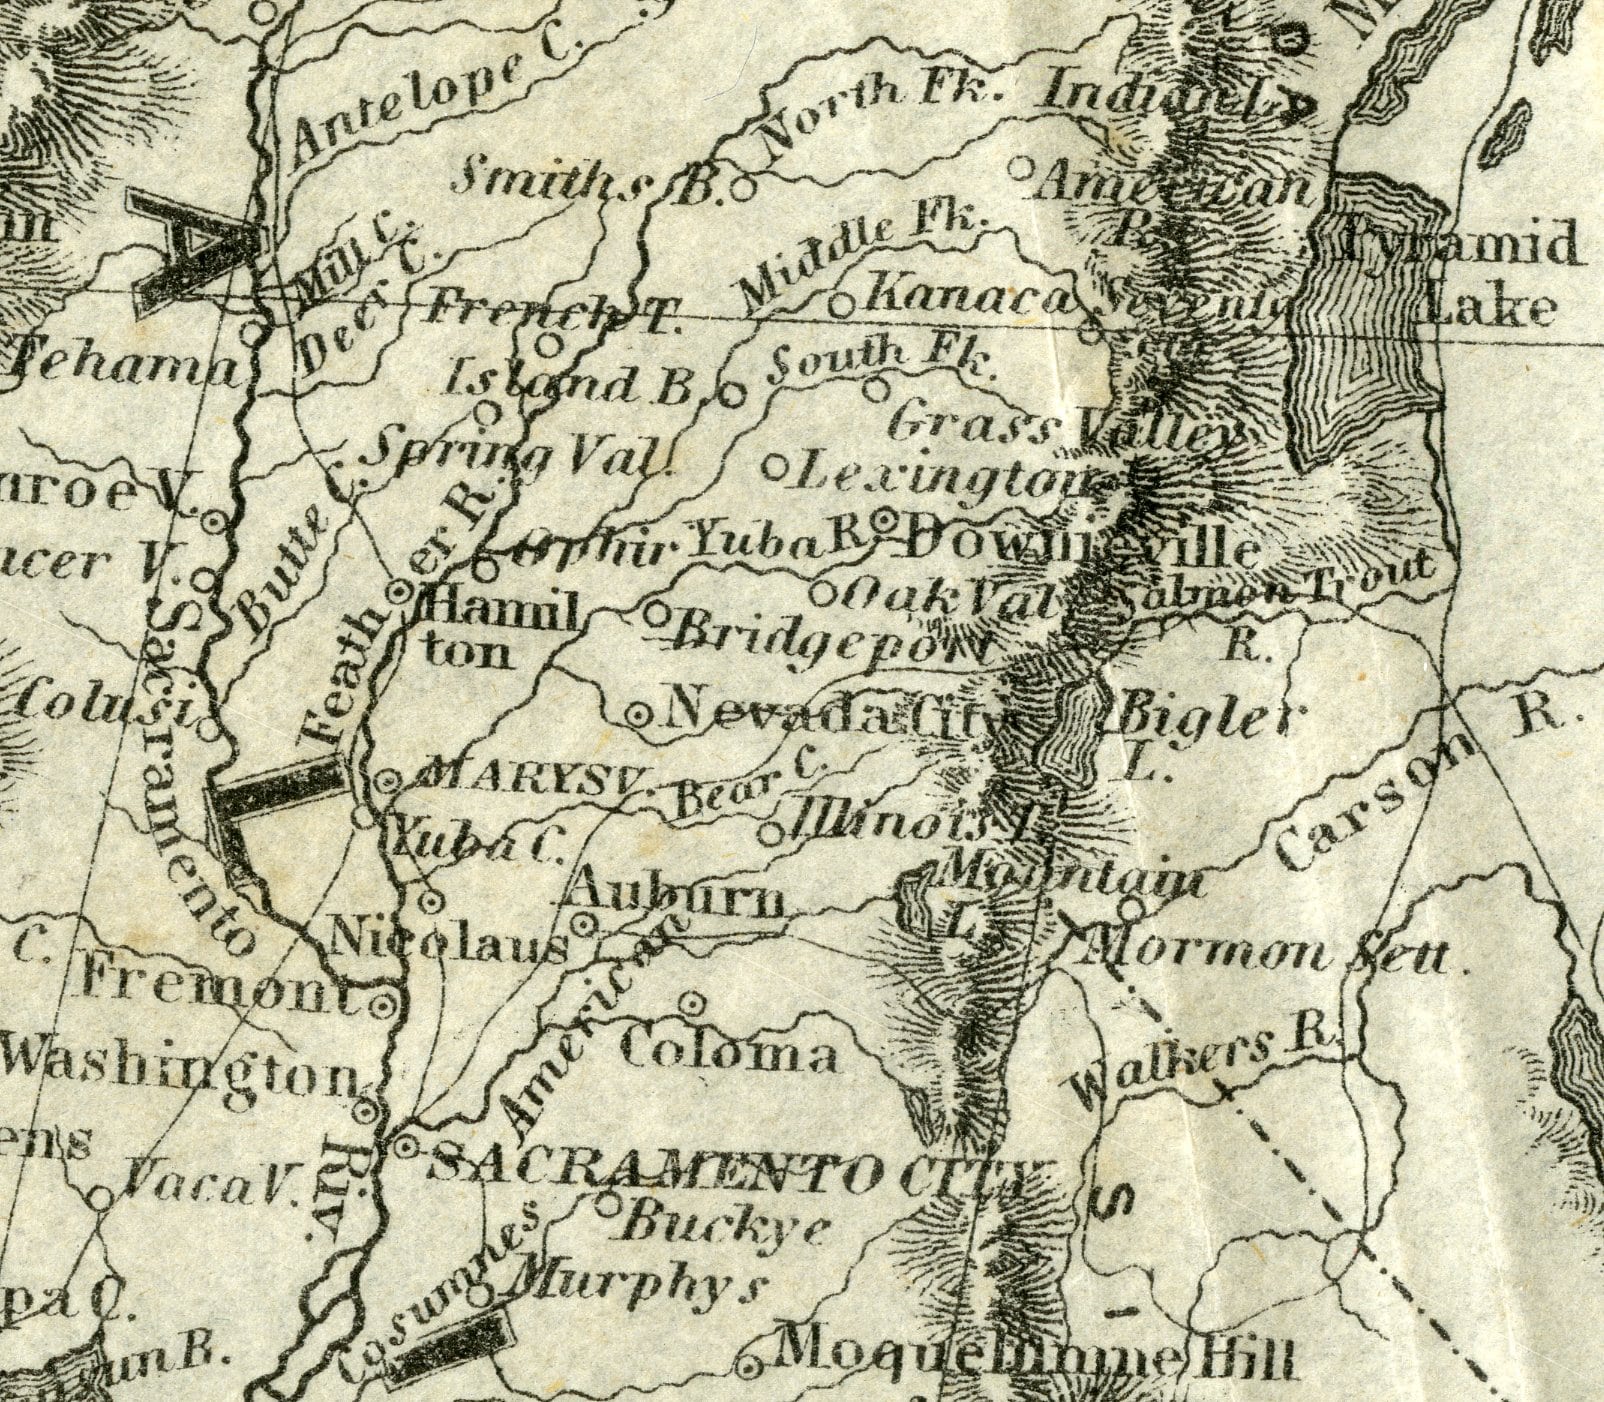 1853 Map of The United States Showing "Bigler L. [Lake]"